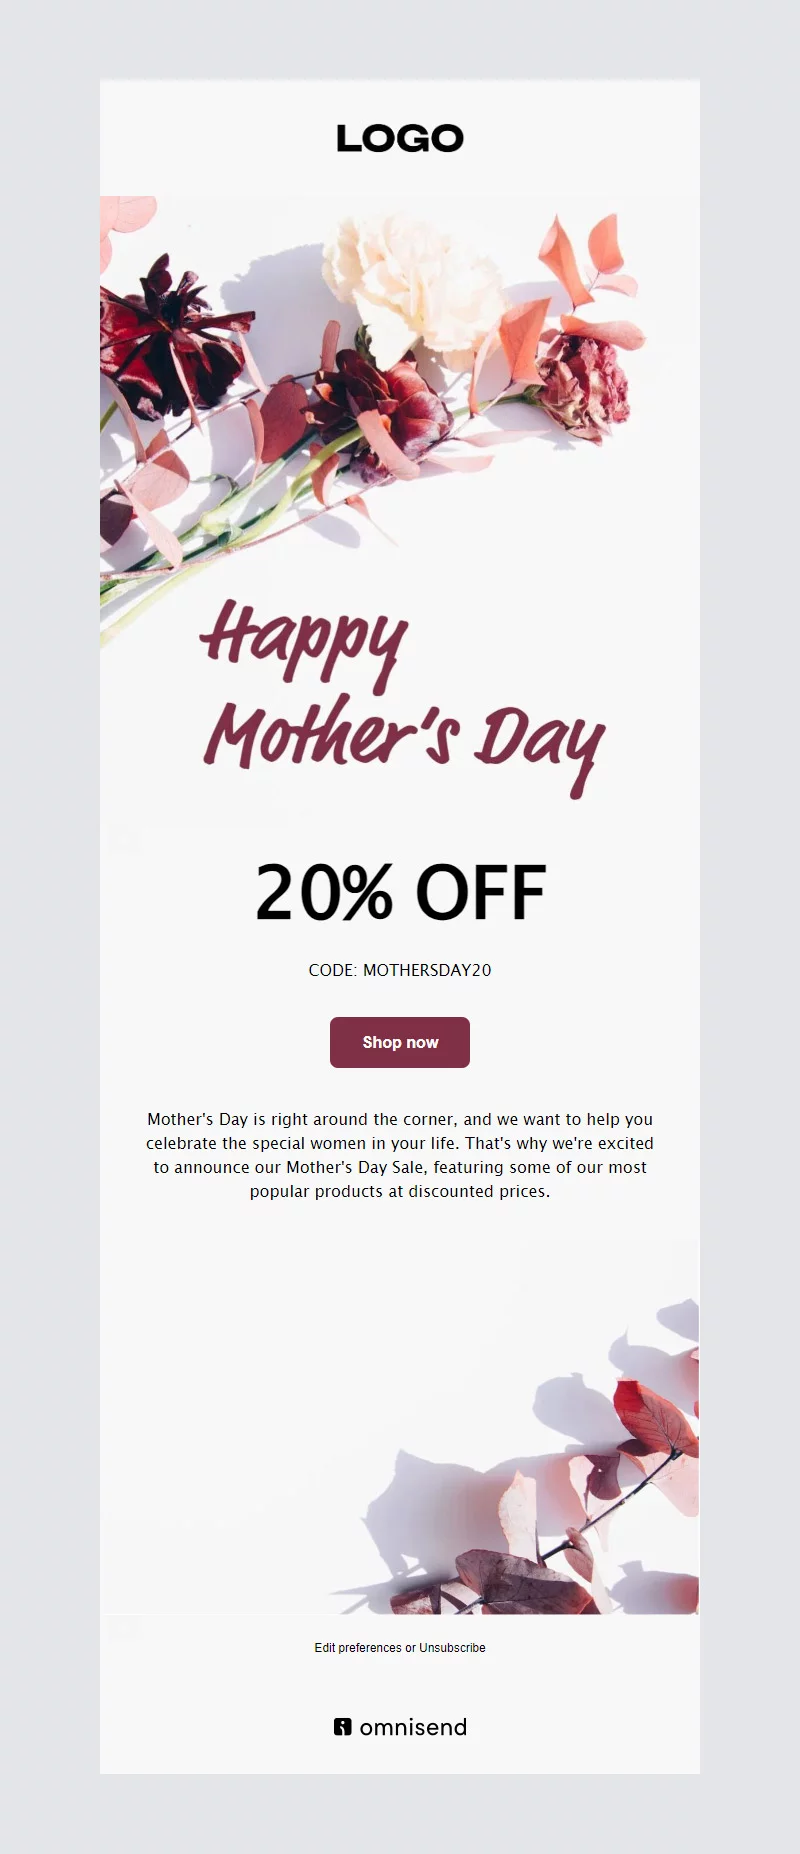 Mother's day email templates